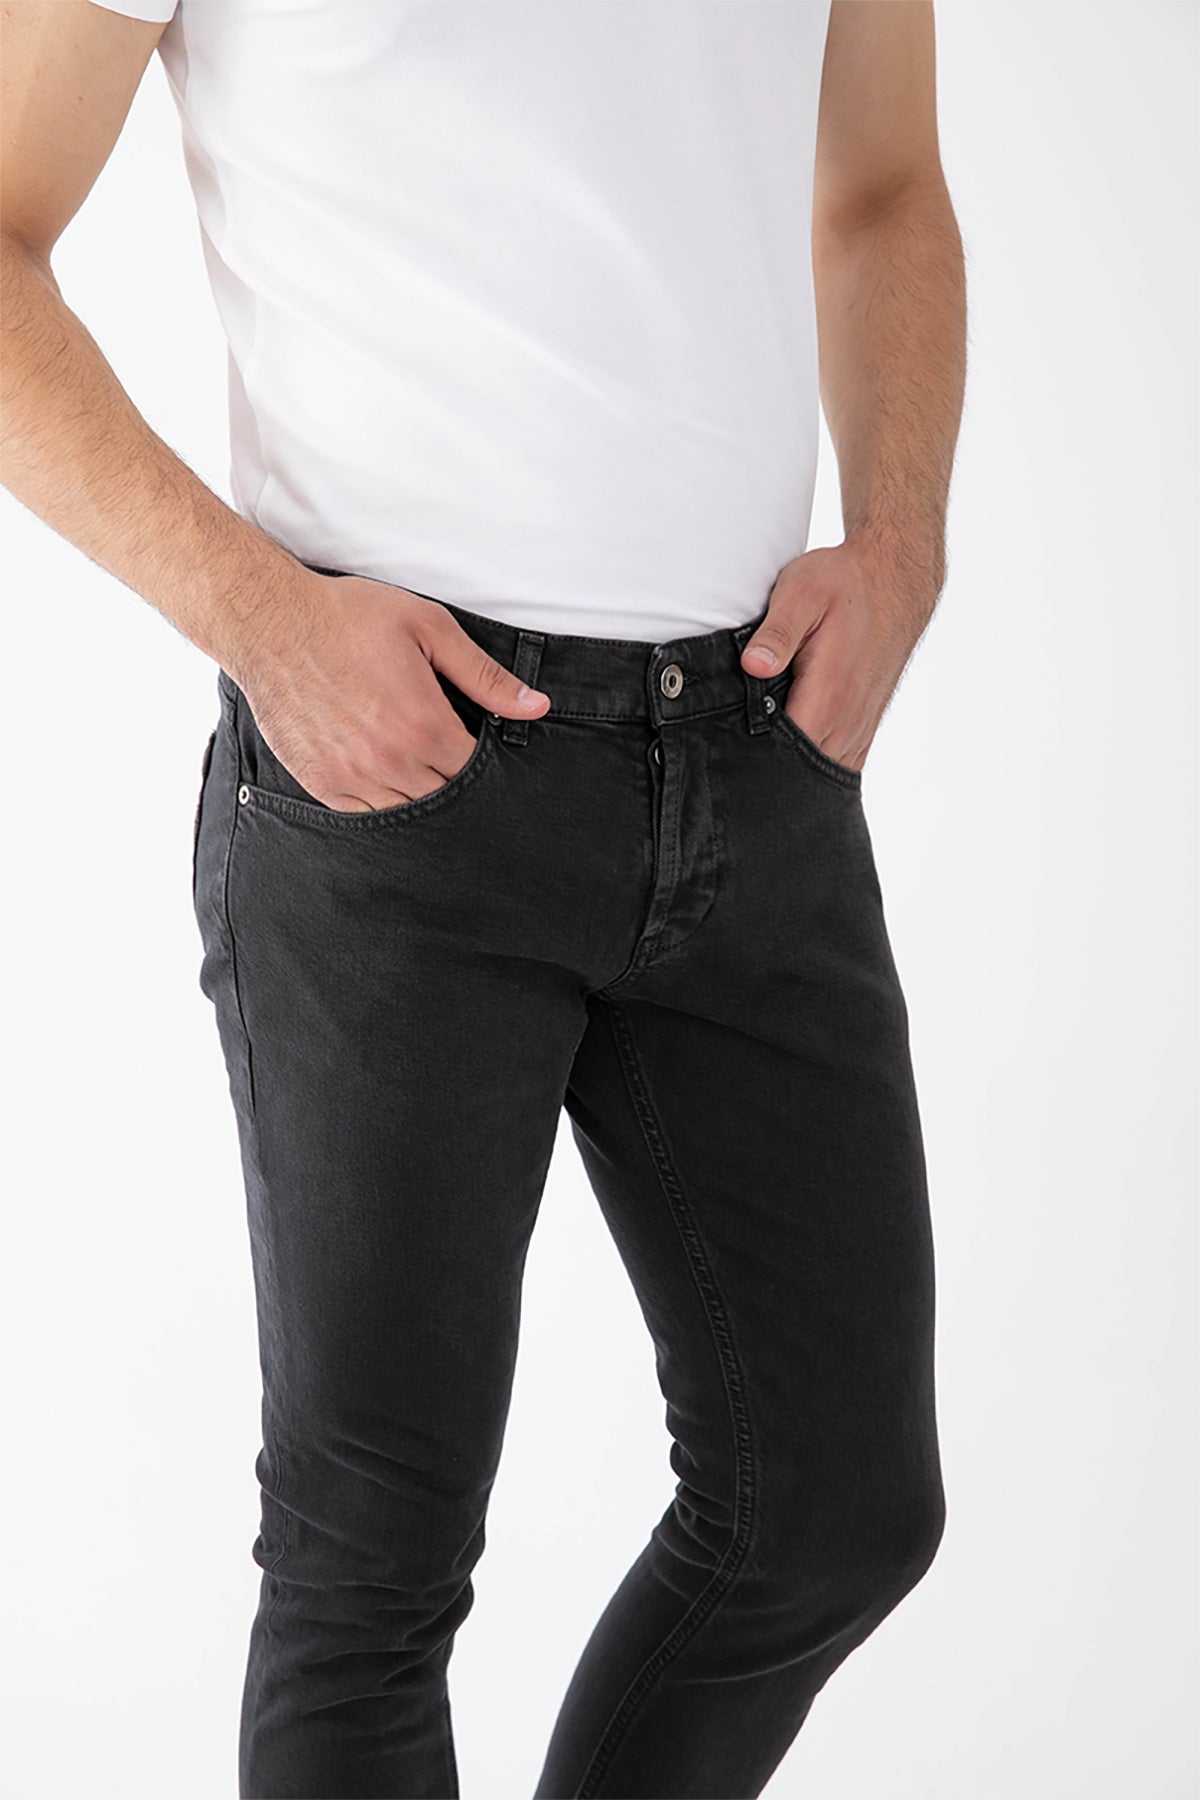 Dondup George Skinny Fit Jeans-Libas Trendy Fashion Store